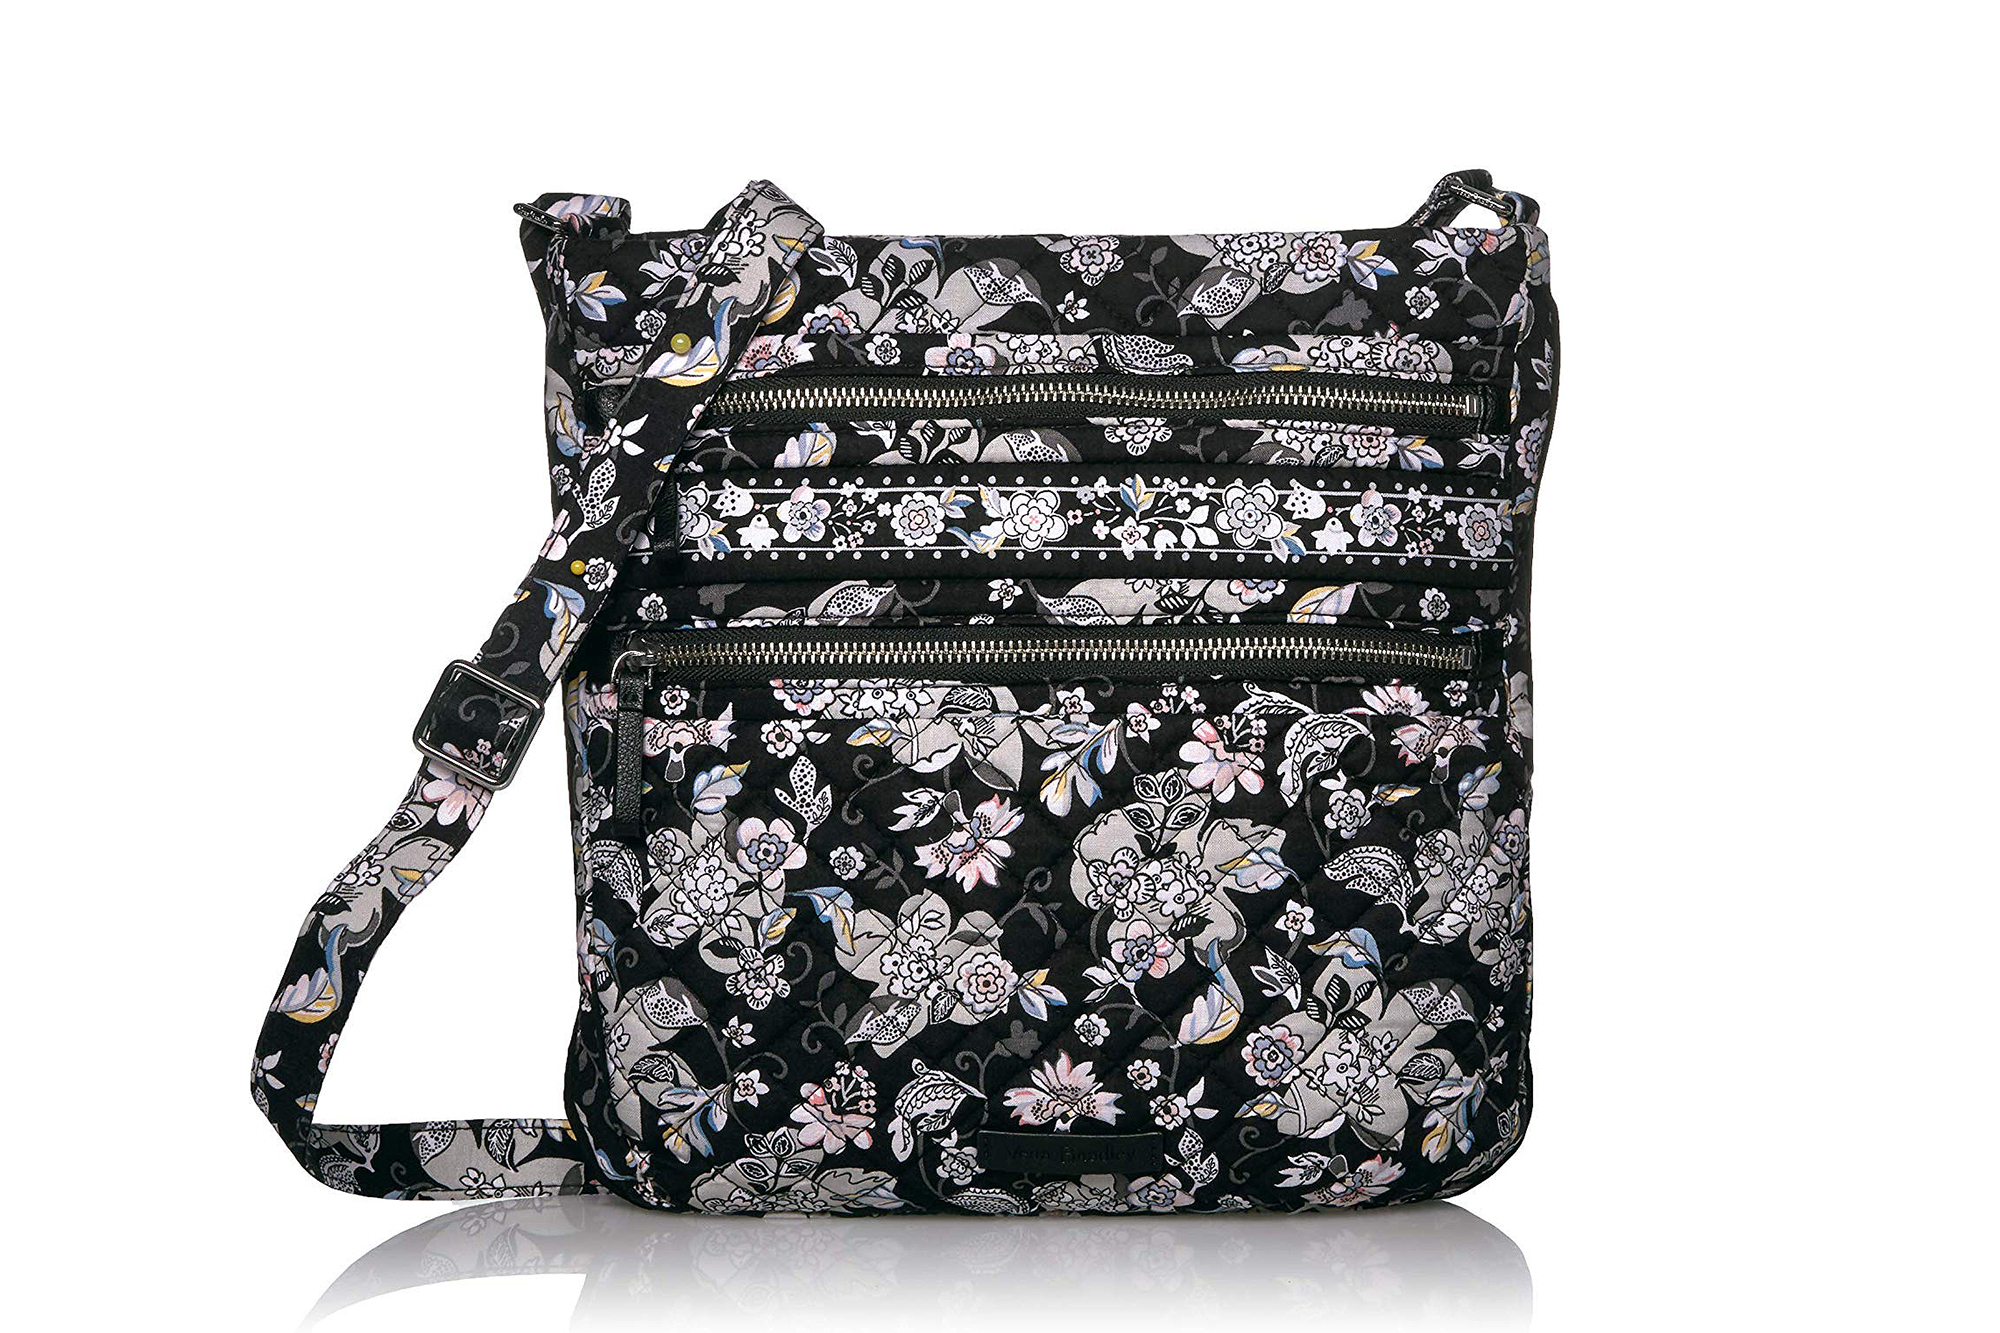 This Vera Bradley Triple Zip Crossbody Comes in Nearly 50 Colors